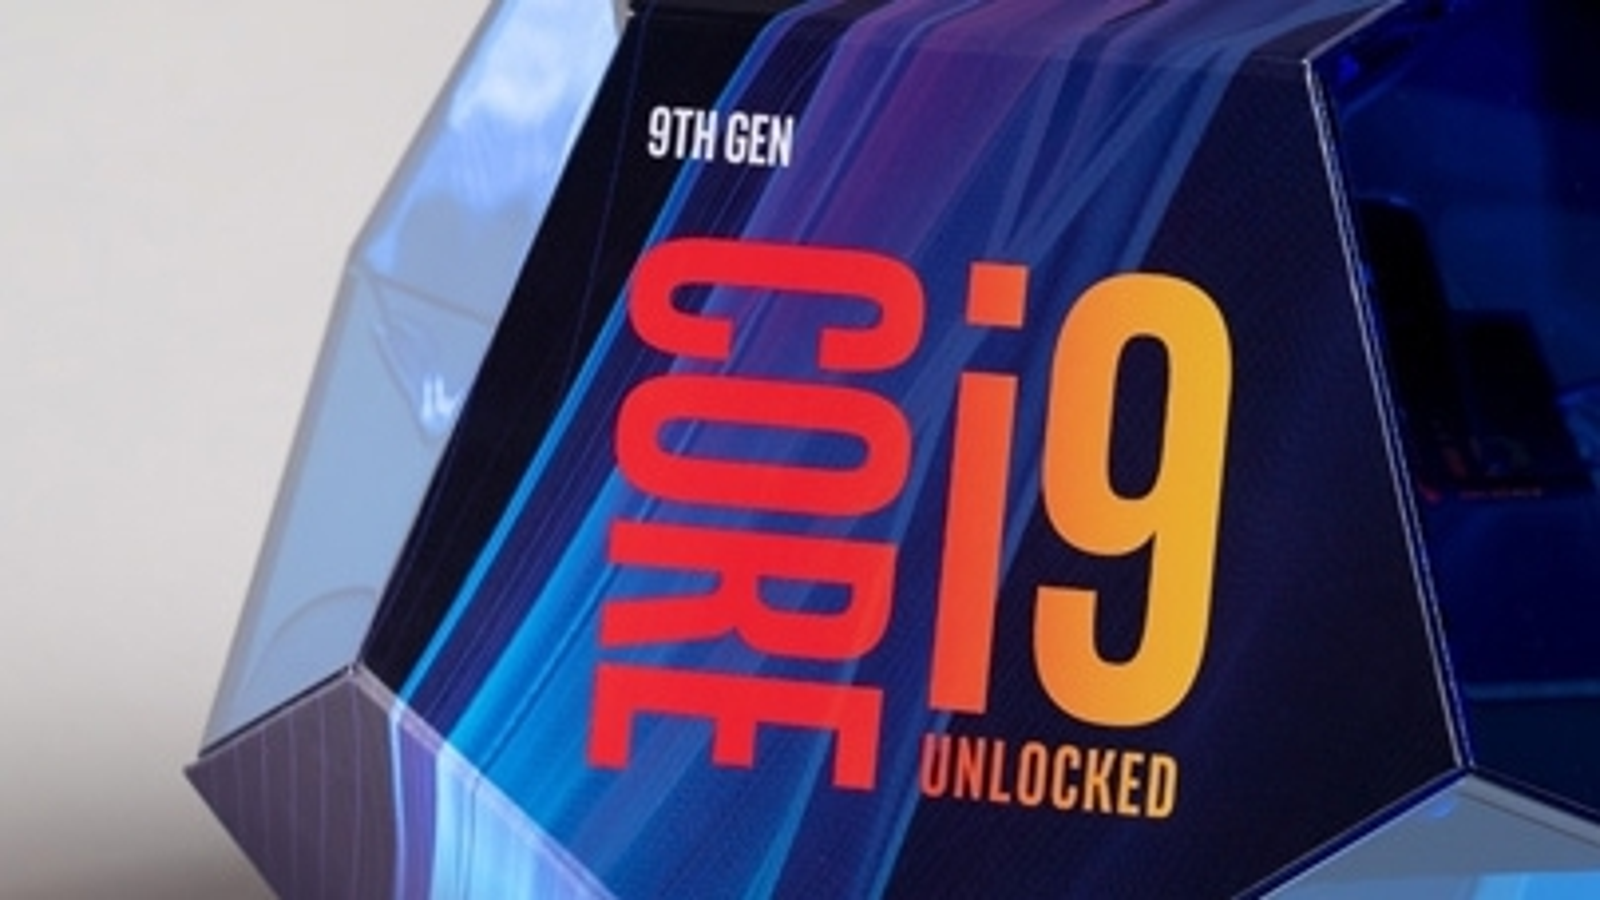 Intel Core i9-9900K review: The fastest gaming CPU has arrived, but good  grief the price